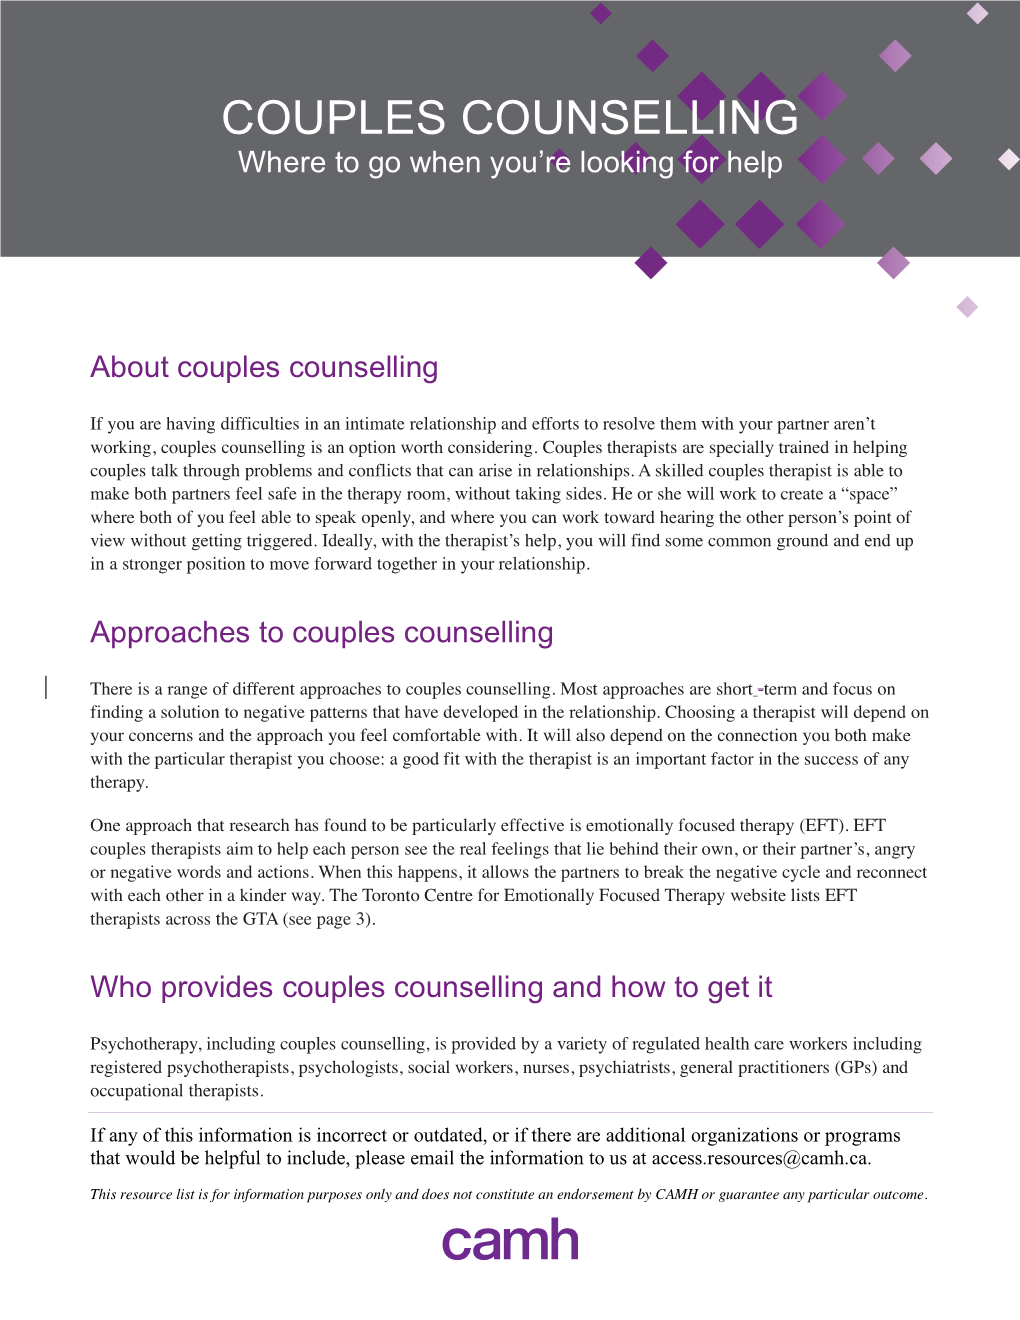 COUPLES COUNSELLING Where to Go When You’Re Looking for Help